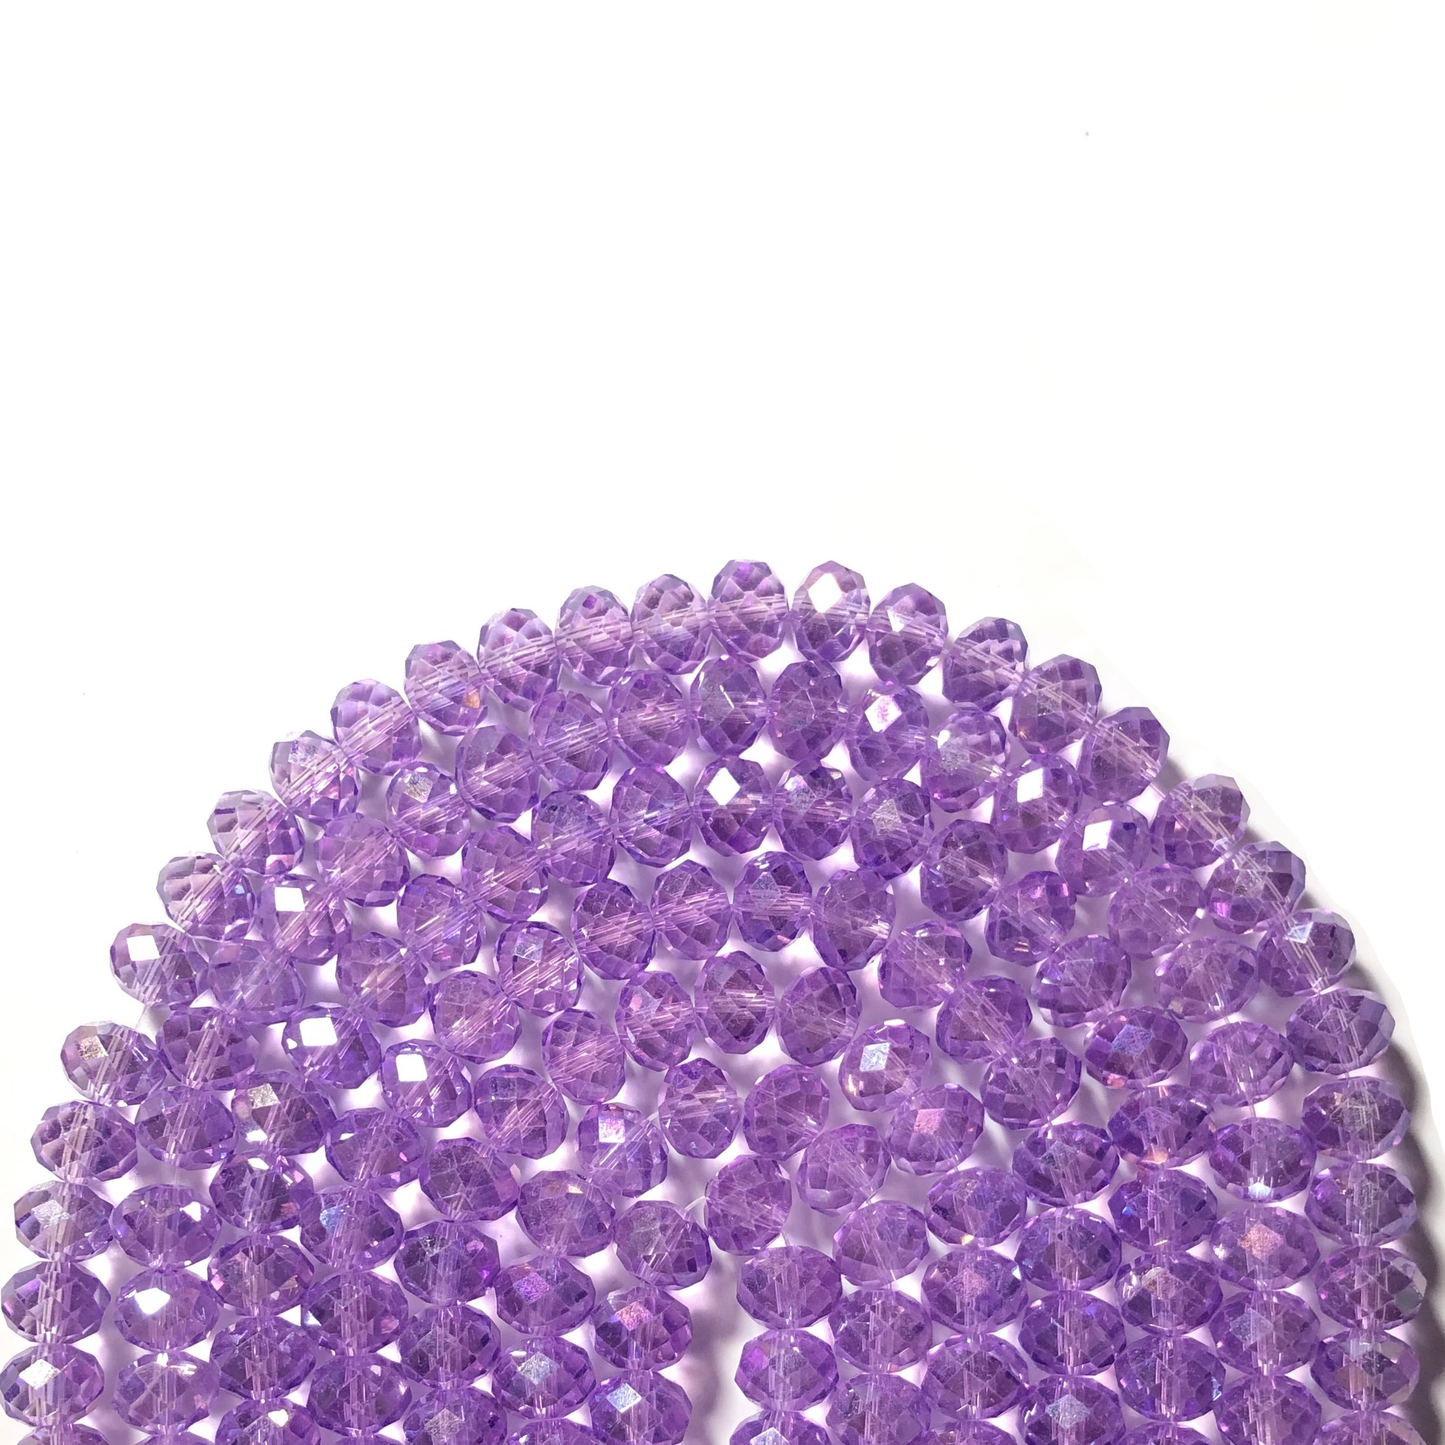 2 Strands/lot 10mm Clear Purple AB Faceted Glass Beads Glass Beads Faceted Glass Beads Charms Beads Beyond